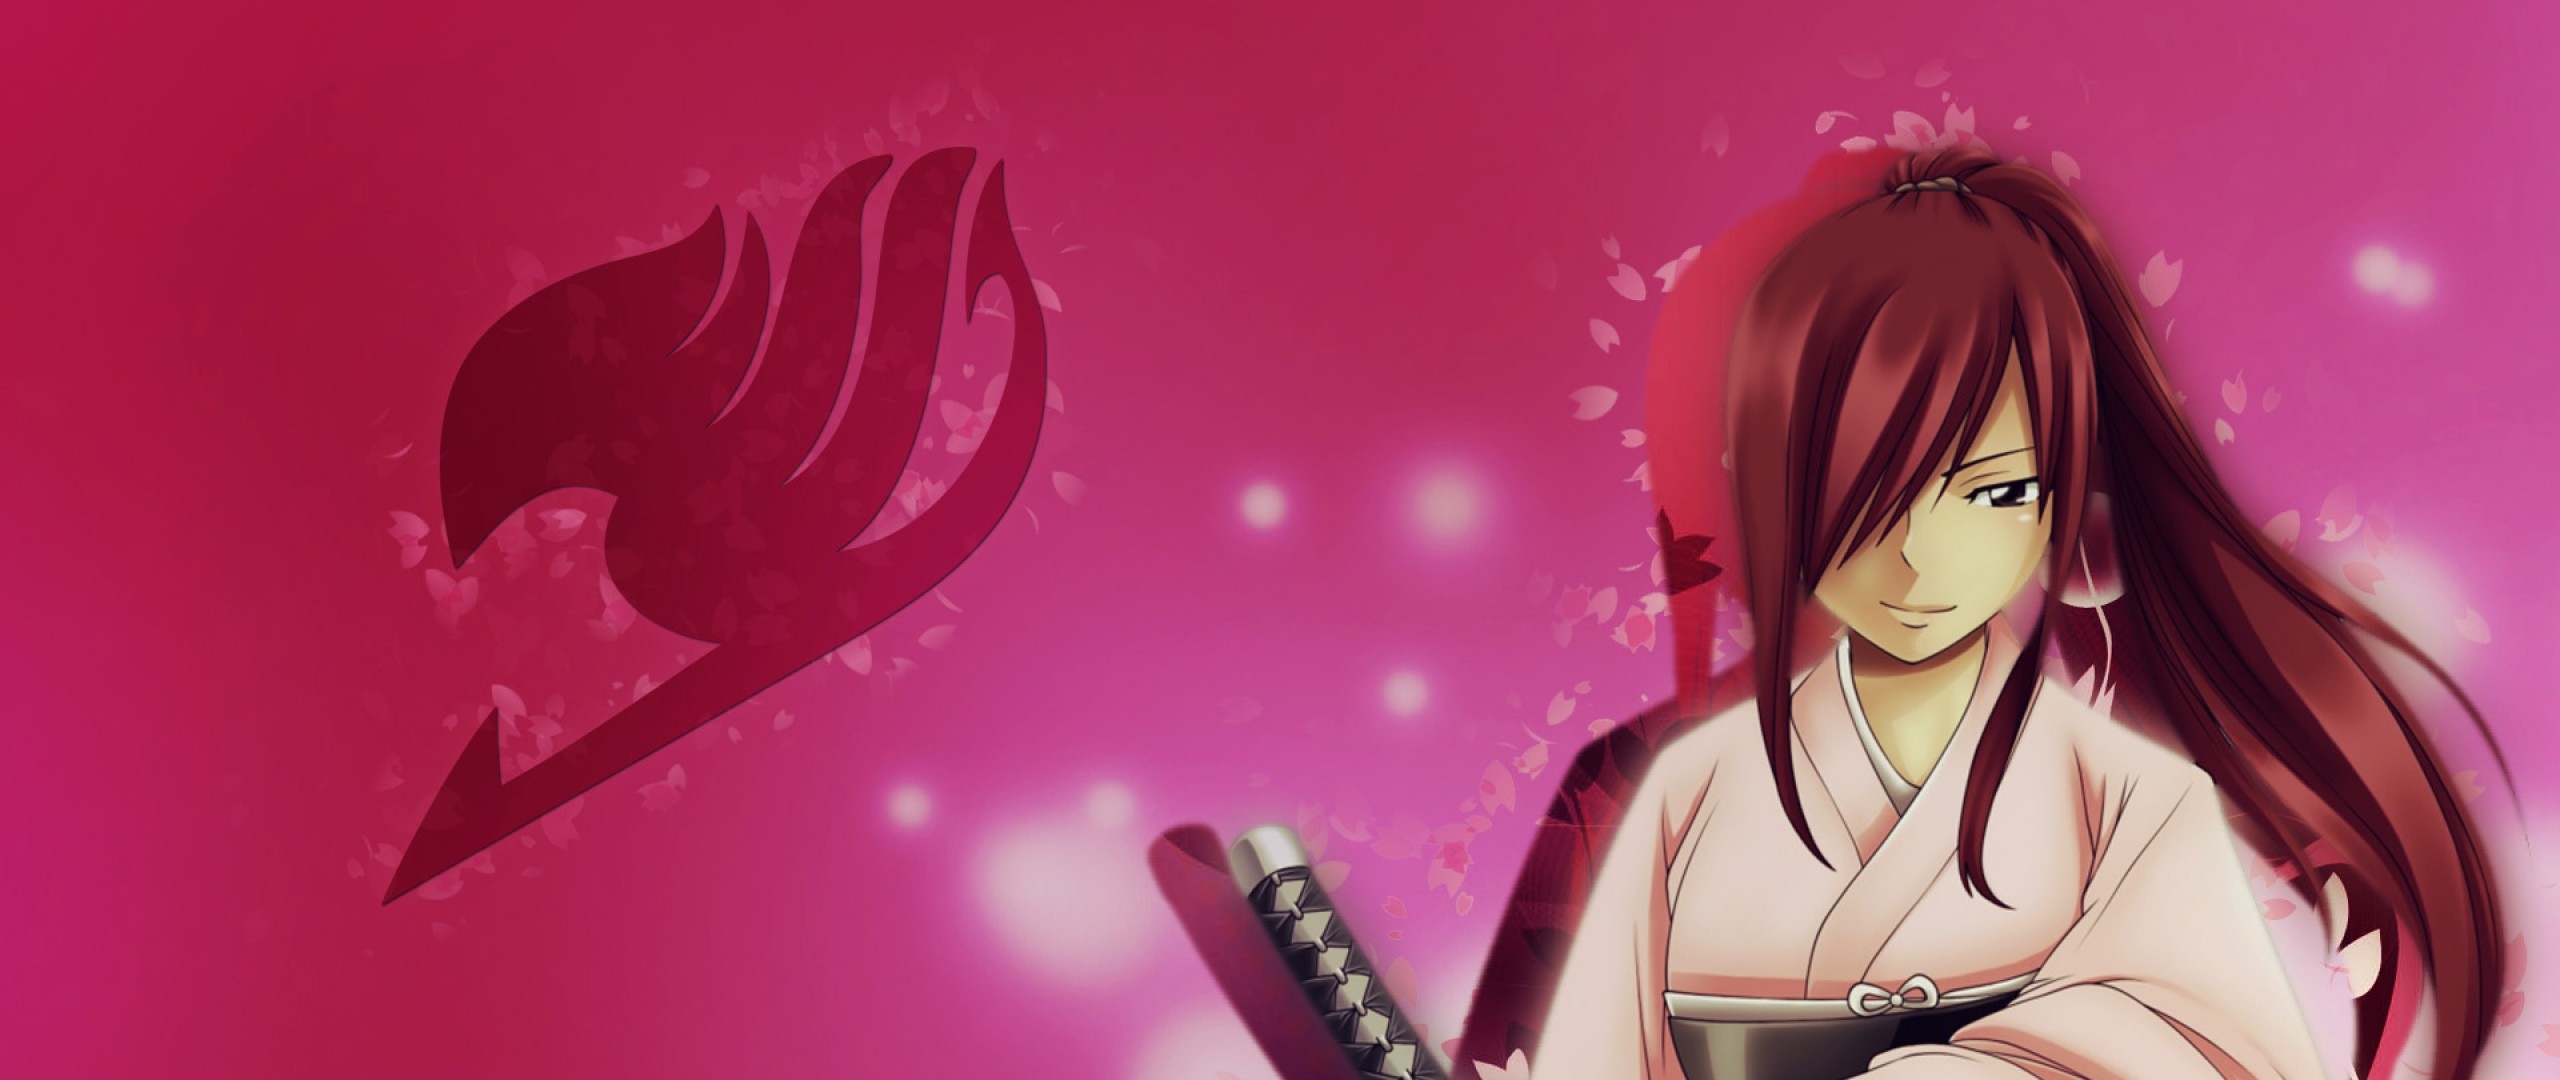 2560x1080  Wallpaper erza scarlet, fairy tail, mage, sword, art, anime